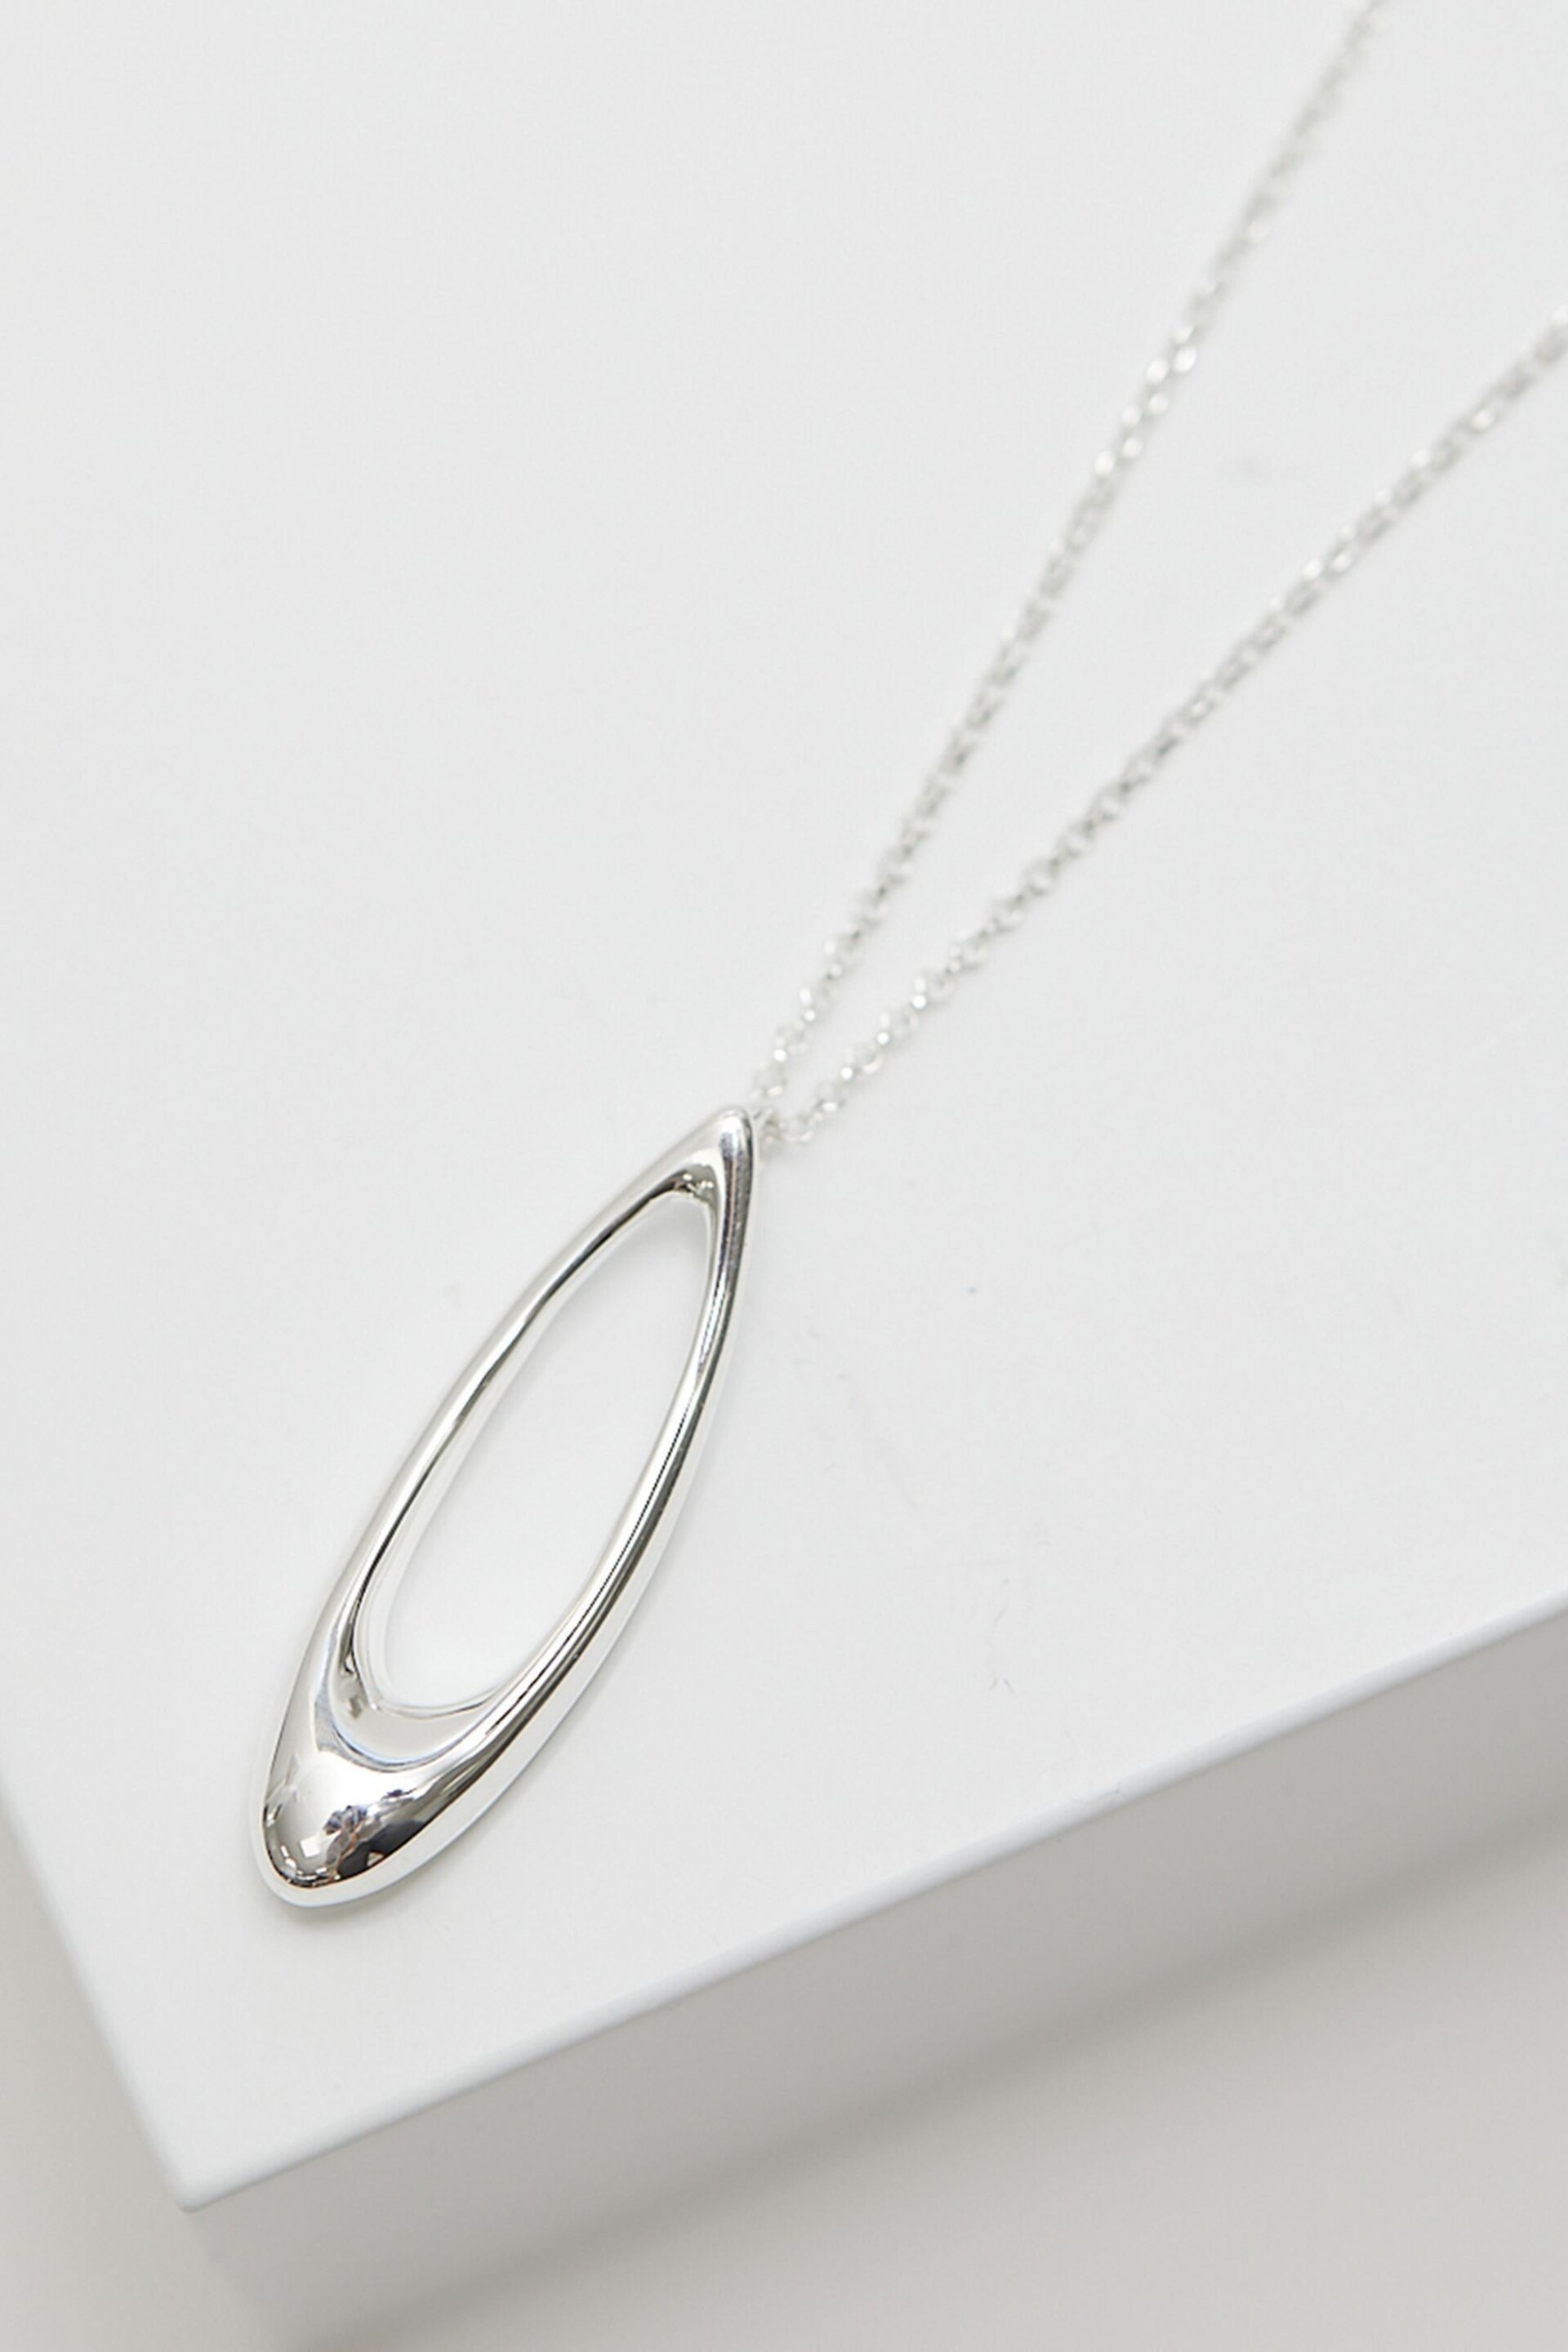 Simply Silver Sterling Silver Tone 925 Open Hoop Teardrop Pendant Necklace - Image 1 of 1